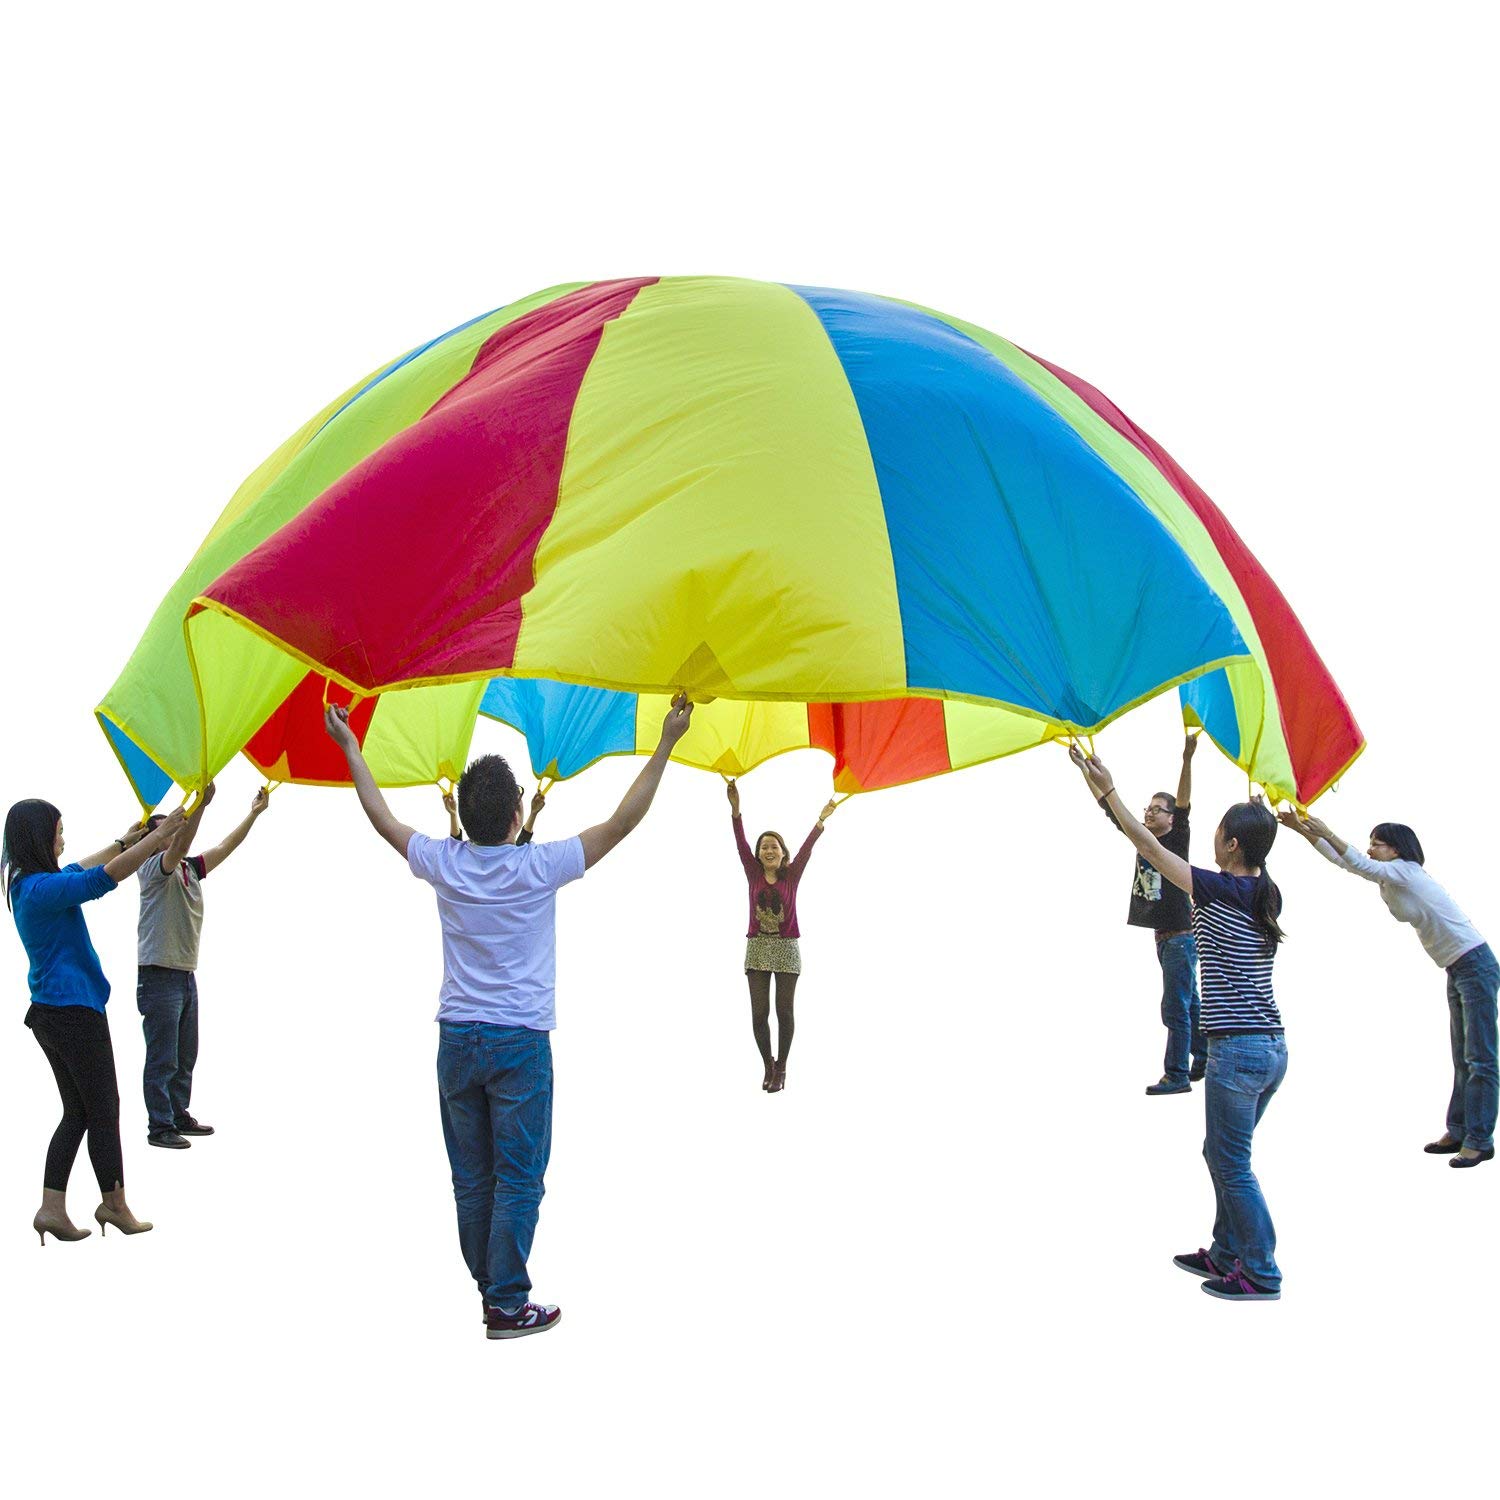 Sonyabecca Parachute, Play Parachute 16ft with 12 Handles for Kids Cooperation Group Play